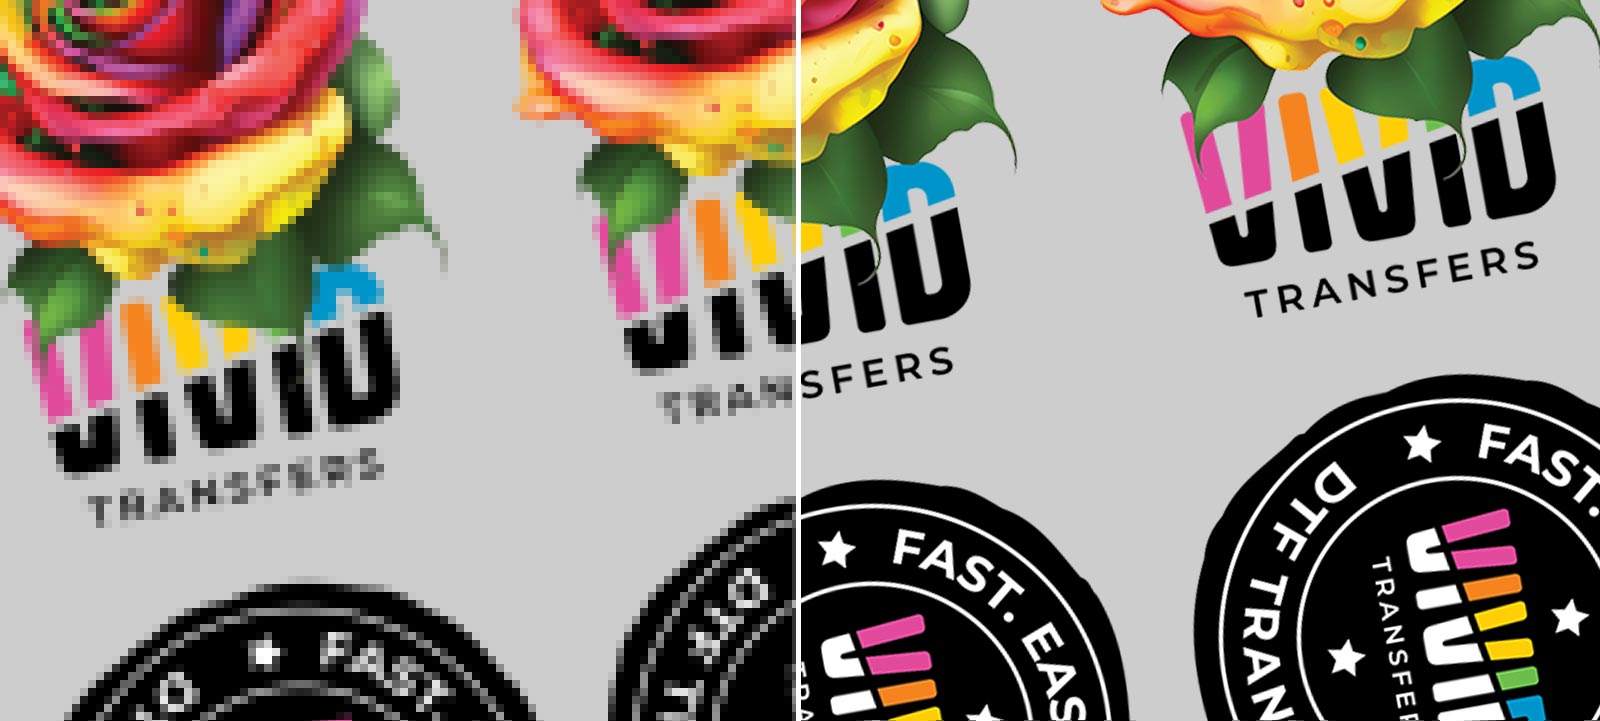 Vivid Transfers - Blog - The Difference Between Pixel and Vector Based Images - Feature